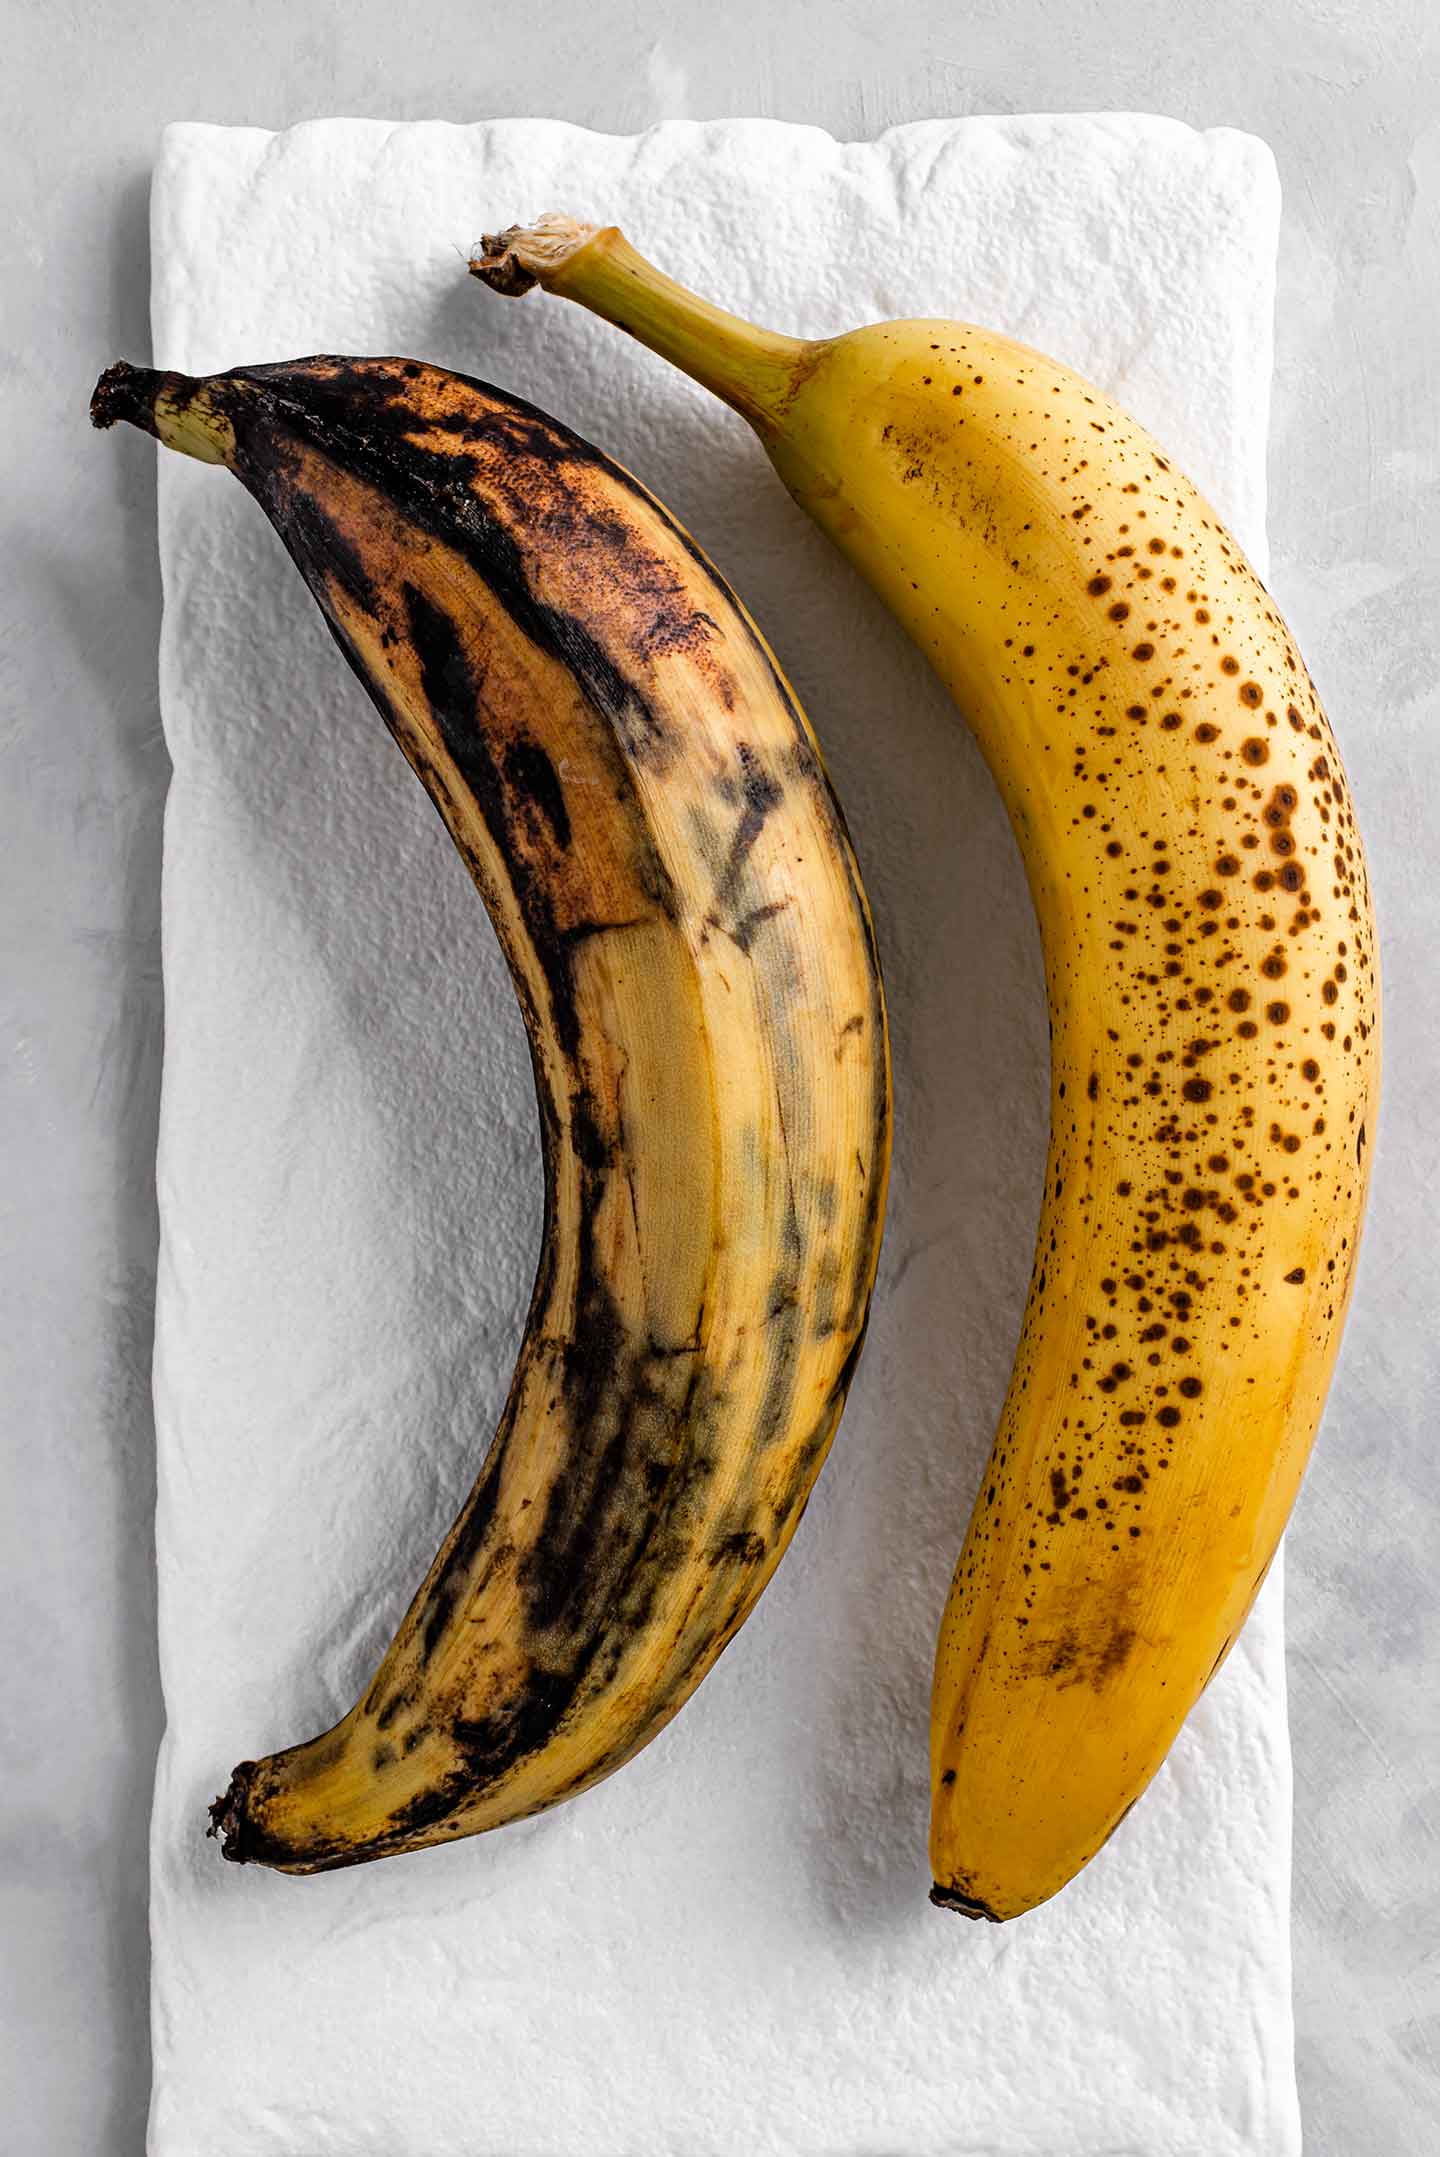 A ripe plantain with black spots next to a ripe banana.